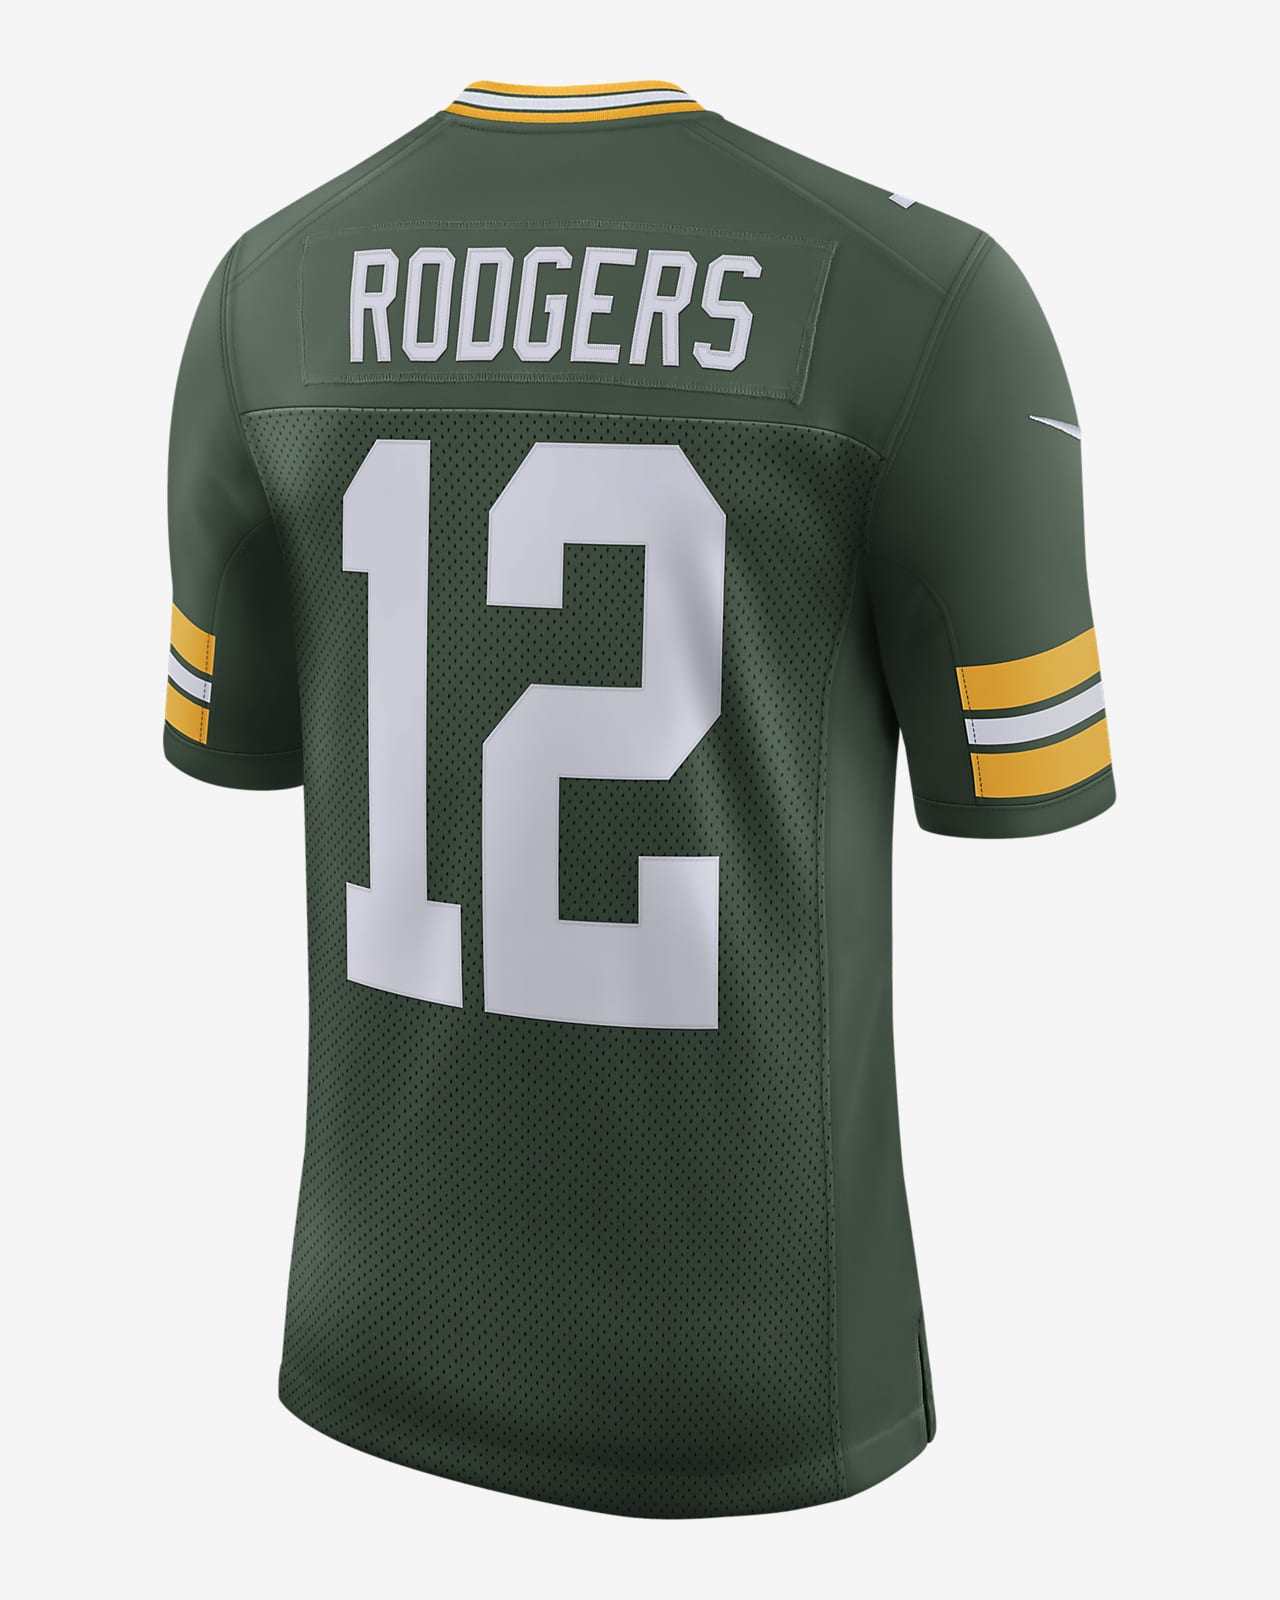 NFL Green Bay Packers Vapor Untouchable (Aaron Rodgers) Men's Limited American Football Jersey